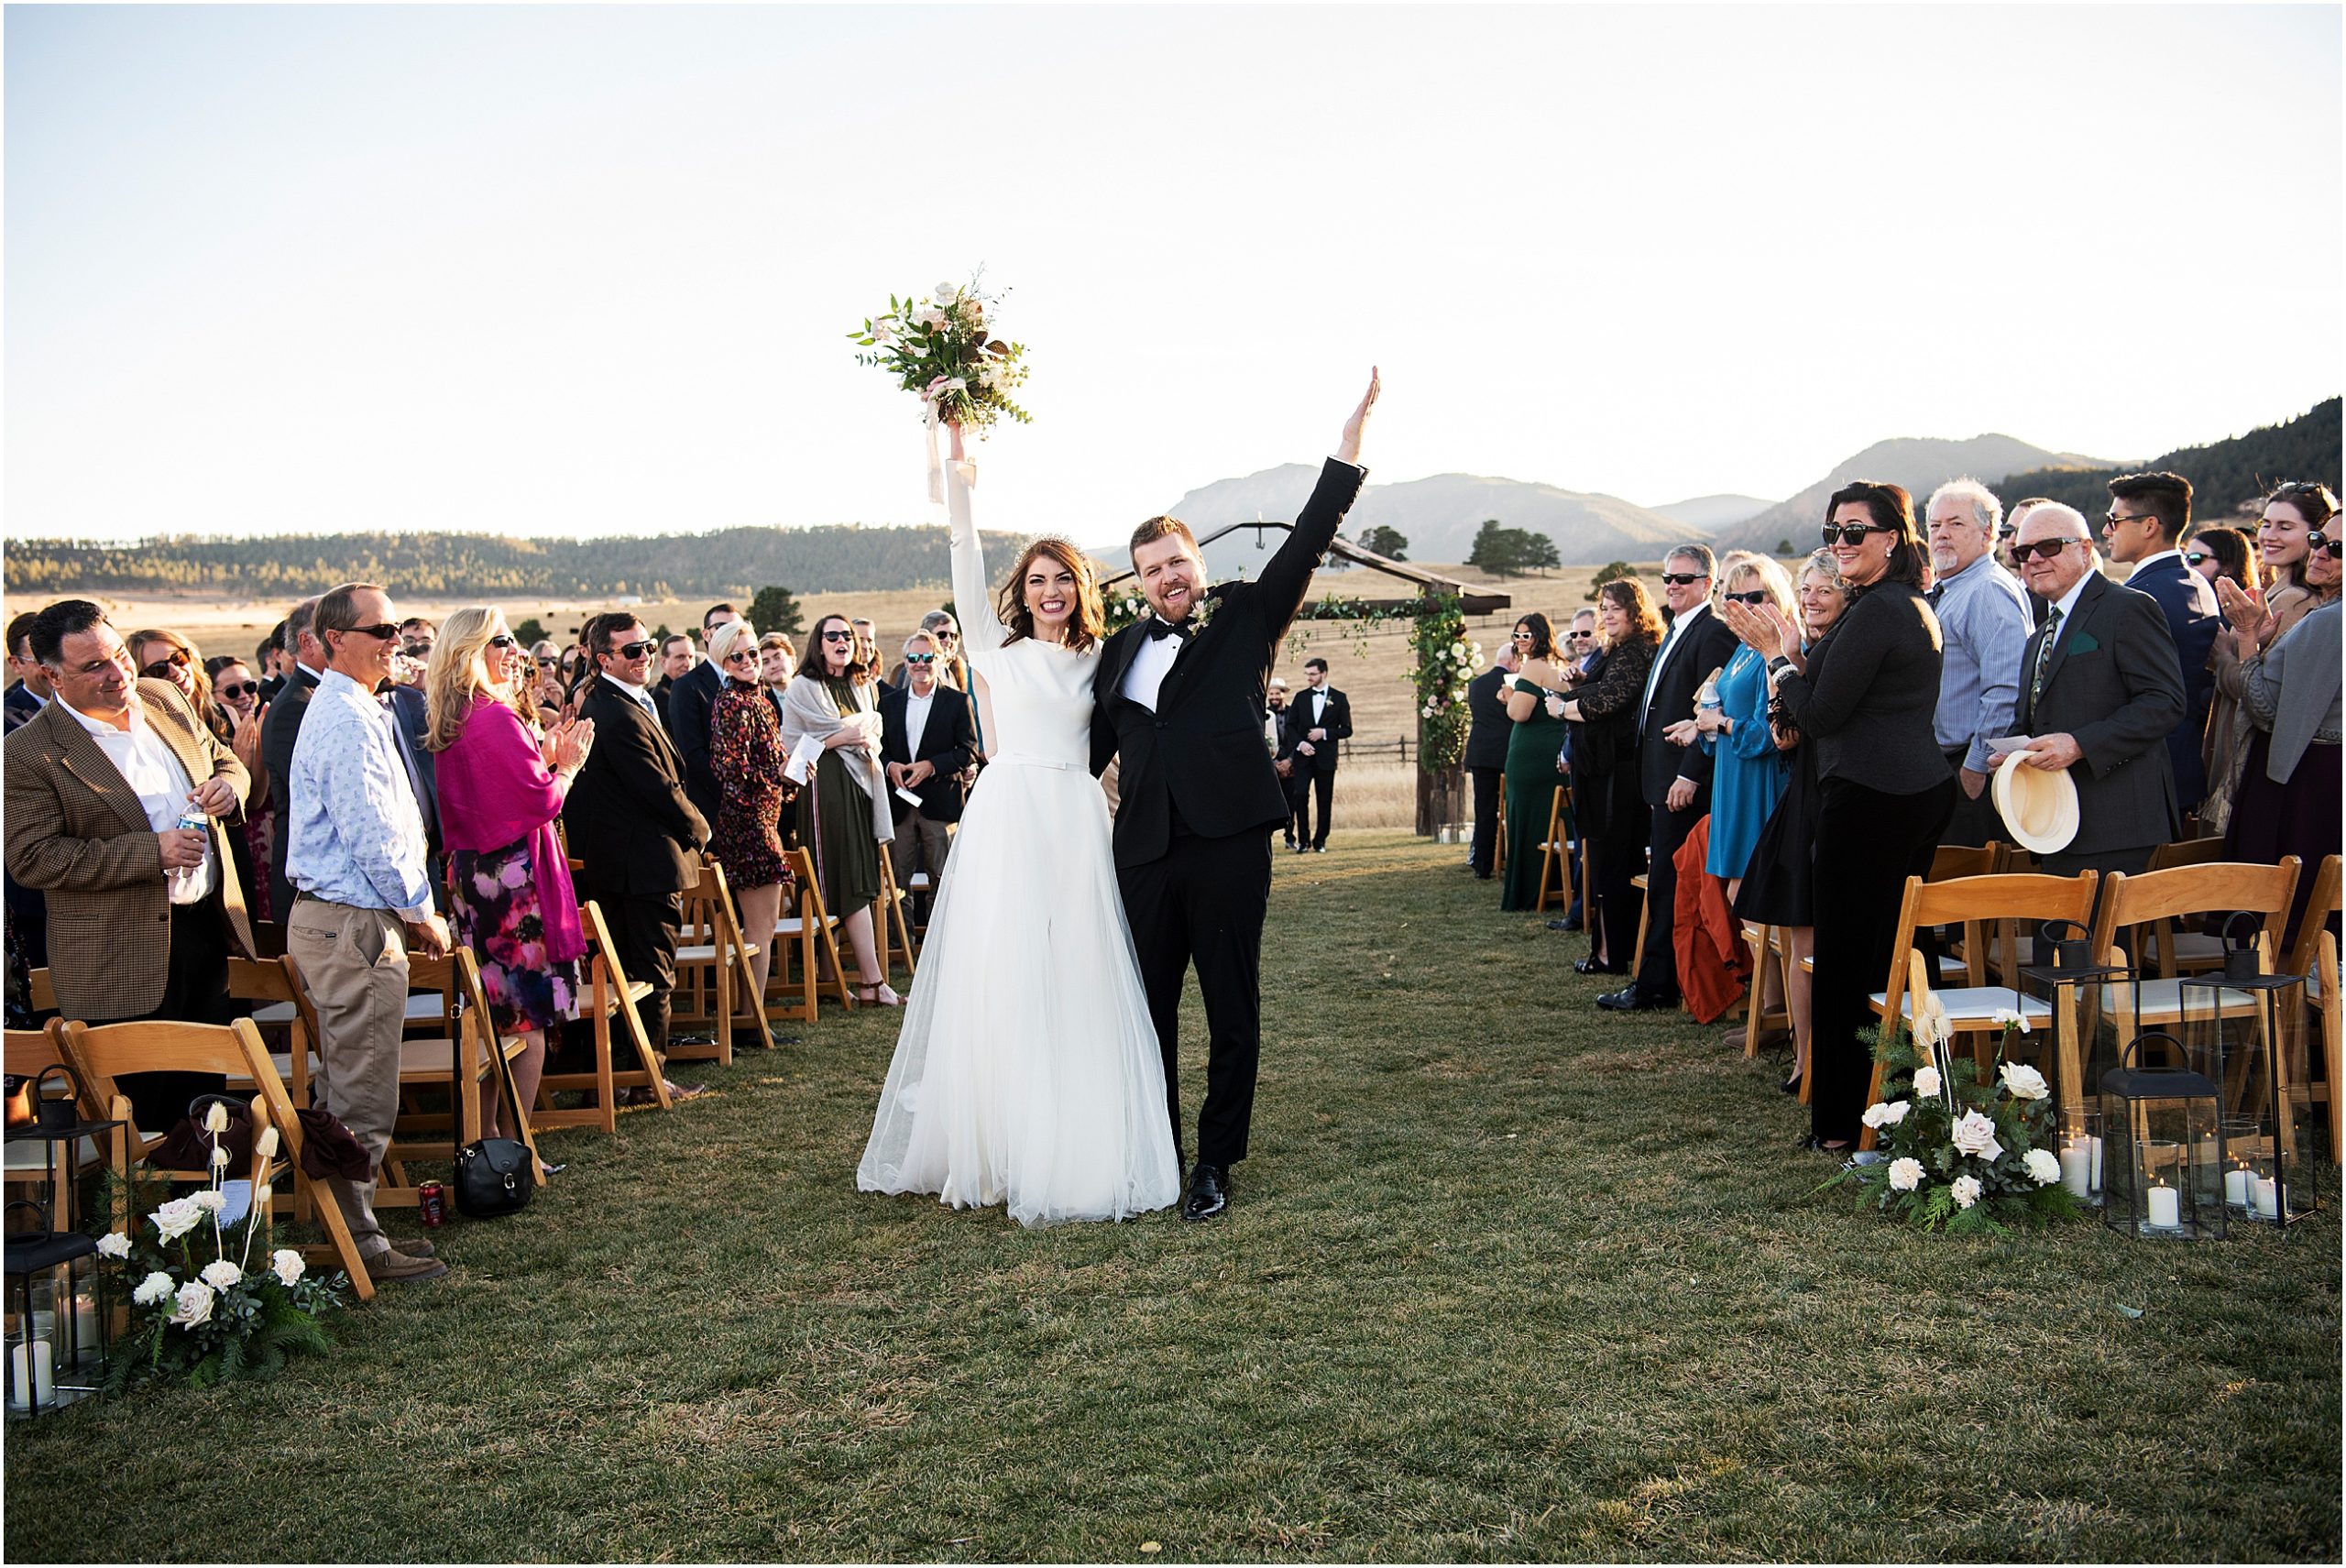 Colorado wedding photographer catches the best wedding moments